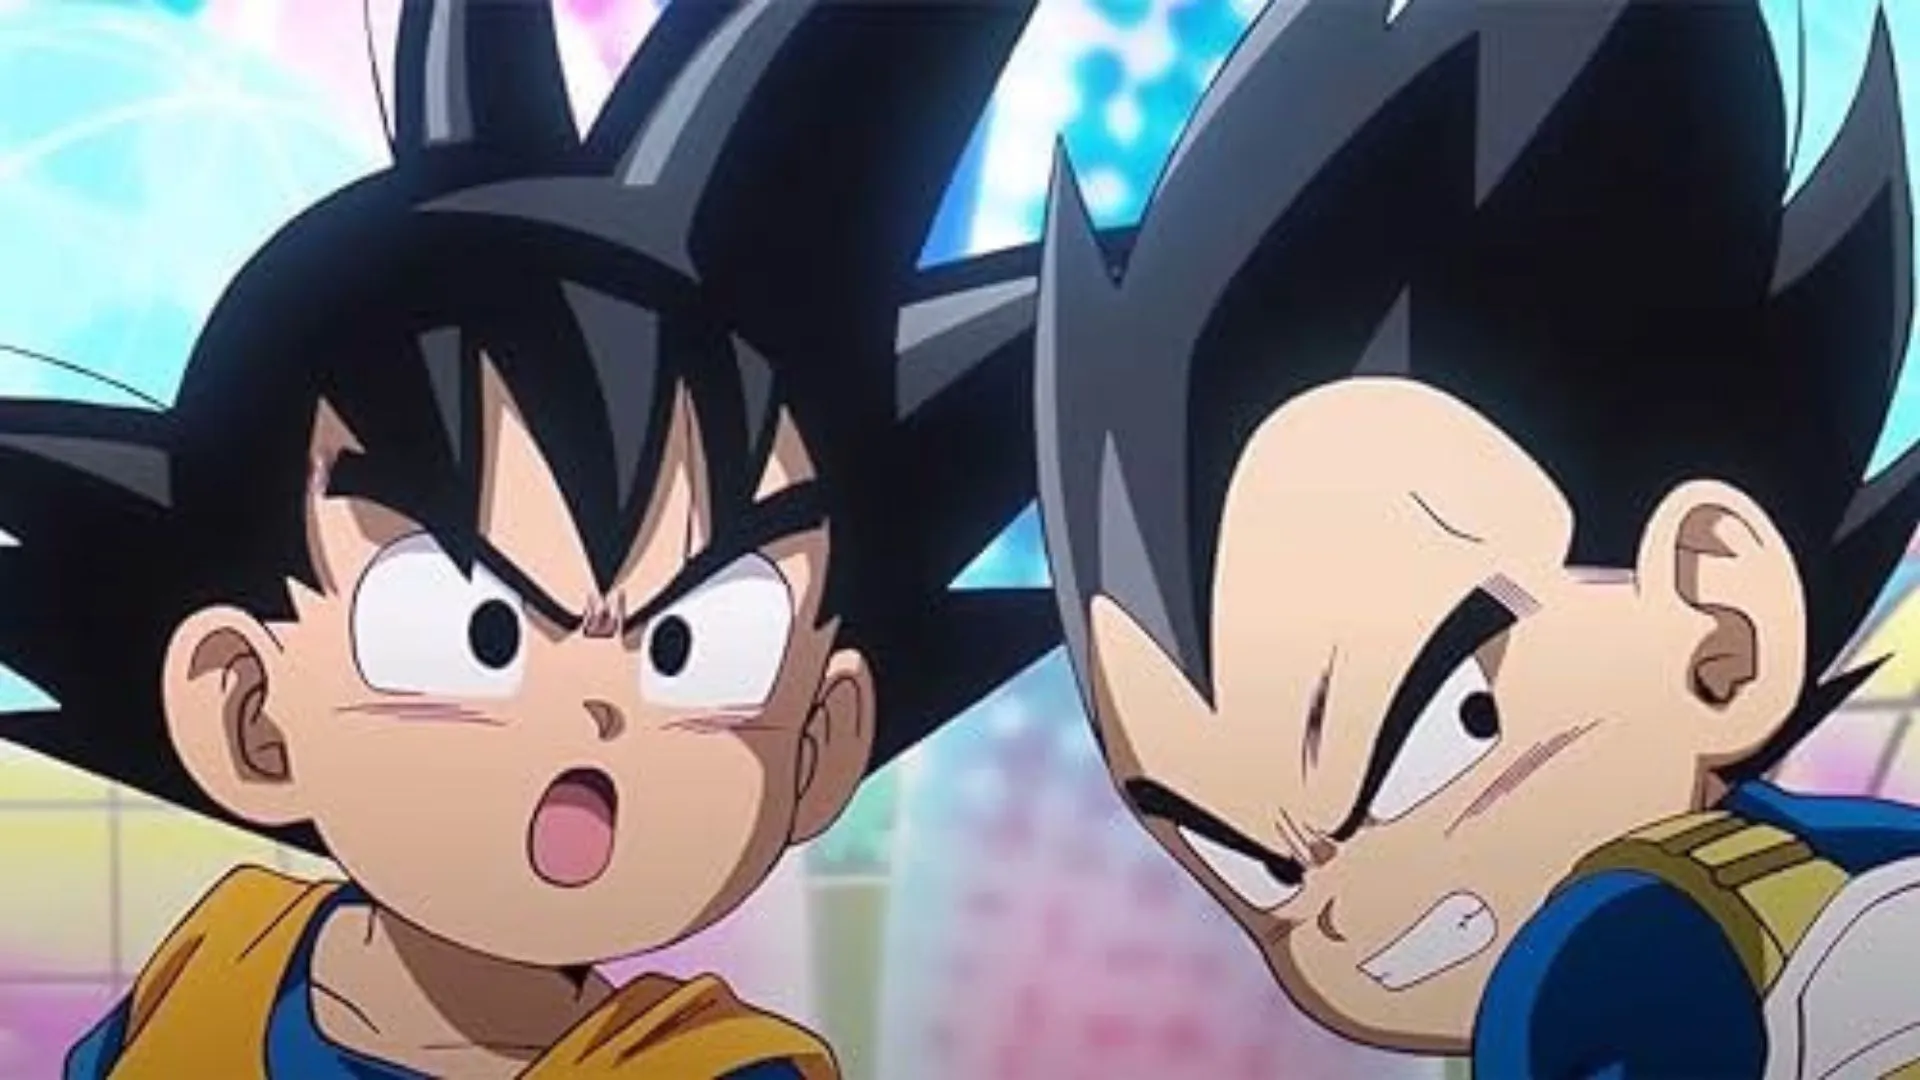 Surprising Backlash: New Dragon Ball Daima Anime Sparks Fandom Outcry - What's Got Fans So Heated?